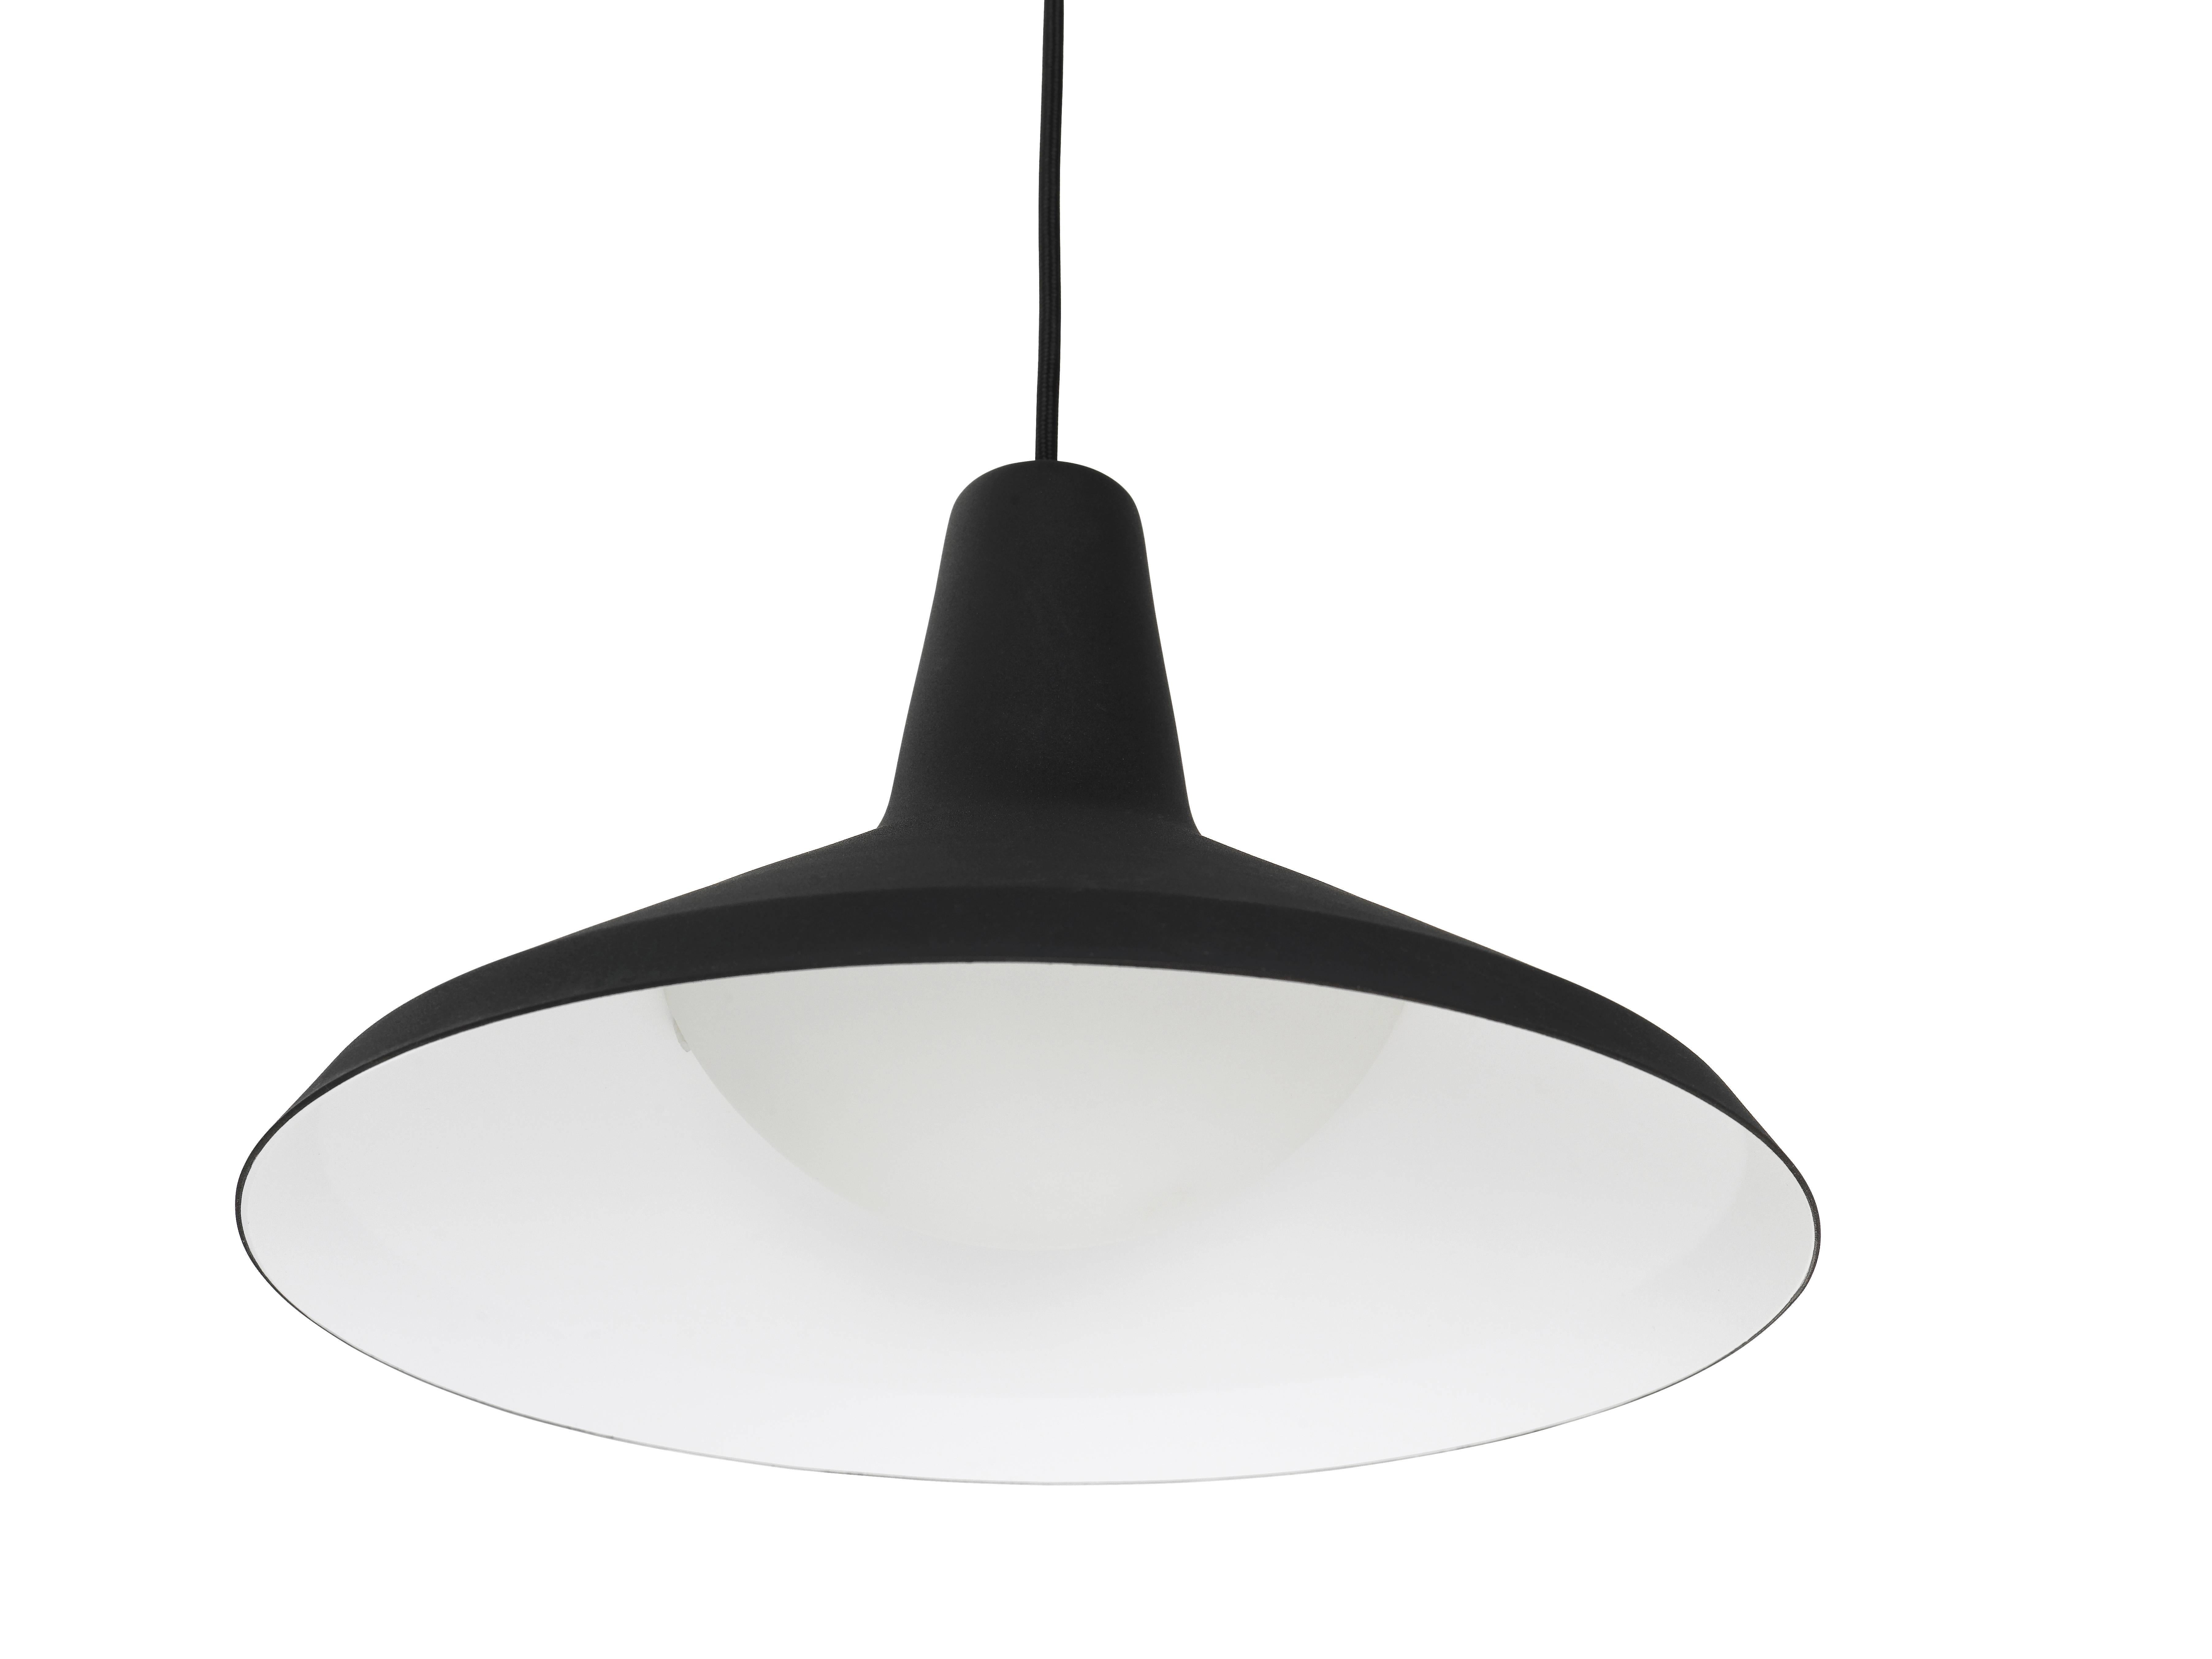 Greta Magnusson Grossman 'G-10' pendant lamp in black. Designed in 1950 by Grossman, this is an authorized re-edition by GUBI of Denmark who meticulously reproduces her work with scrupulous attention to detail and materials that are faithful to the